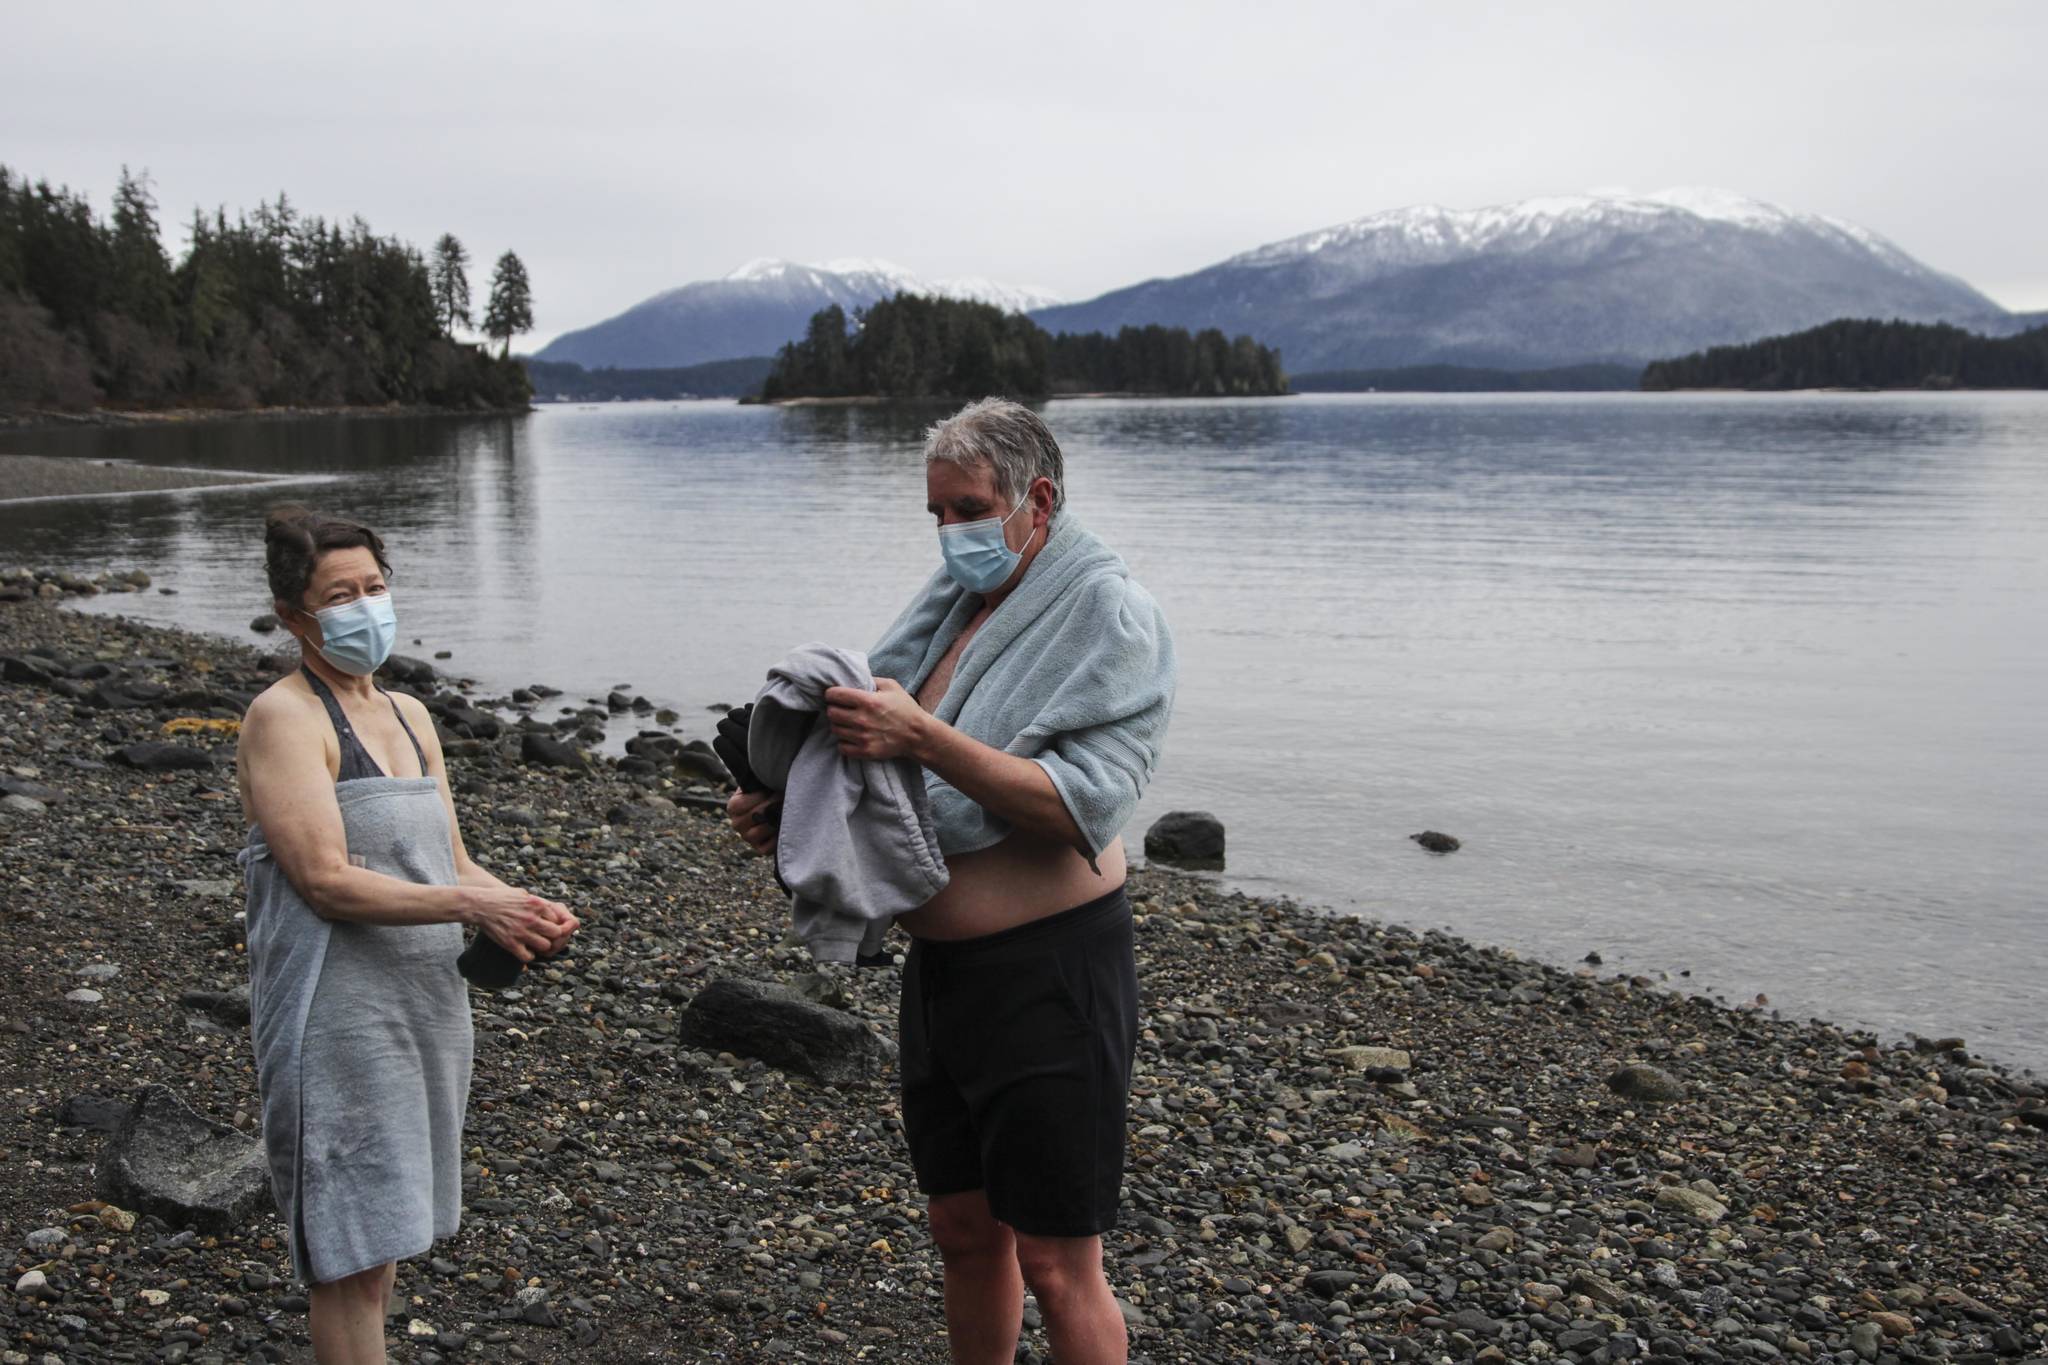 Sherri McDonald and Reid Tippets dry off after their annual dip in the water at Auke Recreation Picnic Area on New Years Day, Jan. 1, 2021. Tippets said he’d done the dip for eleven years in a row. The Polar Bear Dip, held for thirty years at Auke Rec, was canceled this year over pandemic concerns, but some individual households opted to make the dip with their families, with masks, distancing, and care very much in evidence, while other pods had fires or walked dogs next to the cold ocean. (Michael S. Lockett / Juneau Empire)